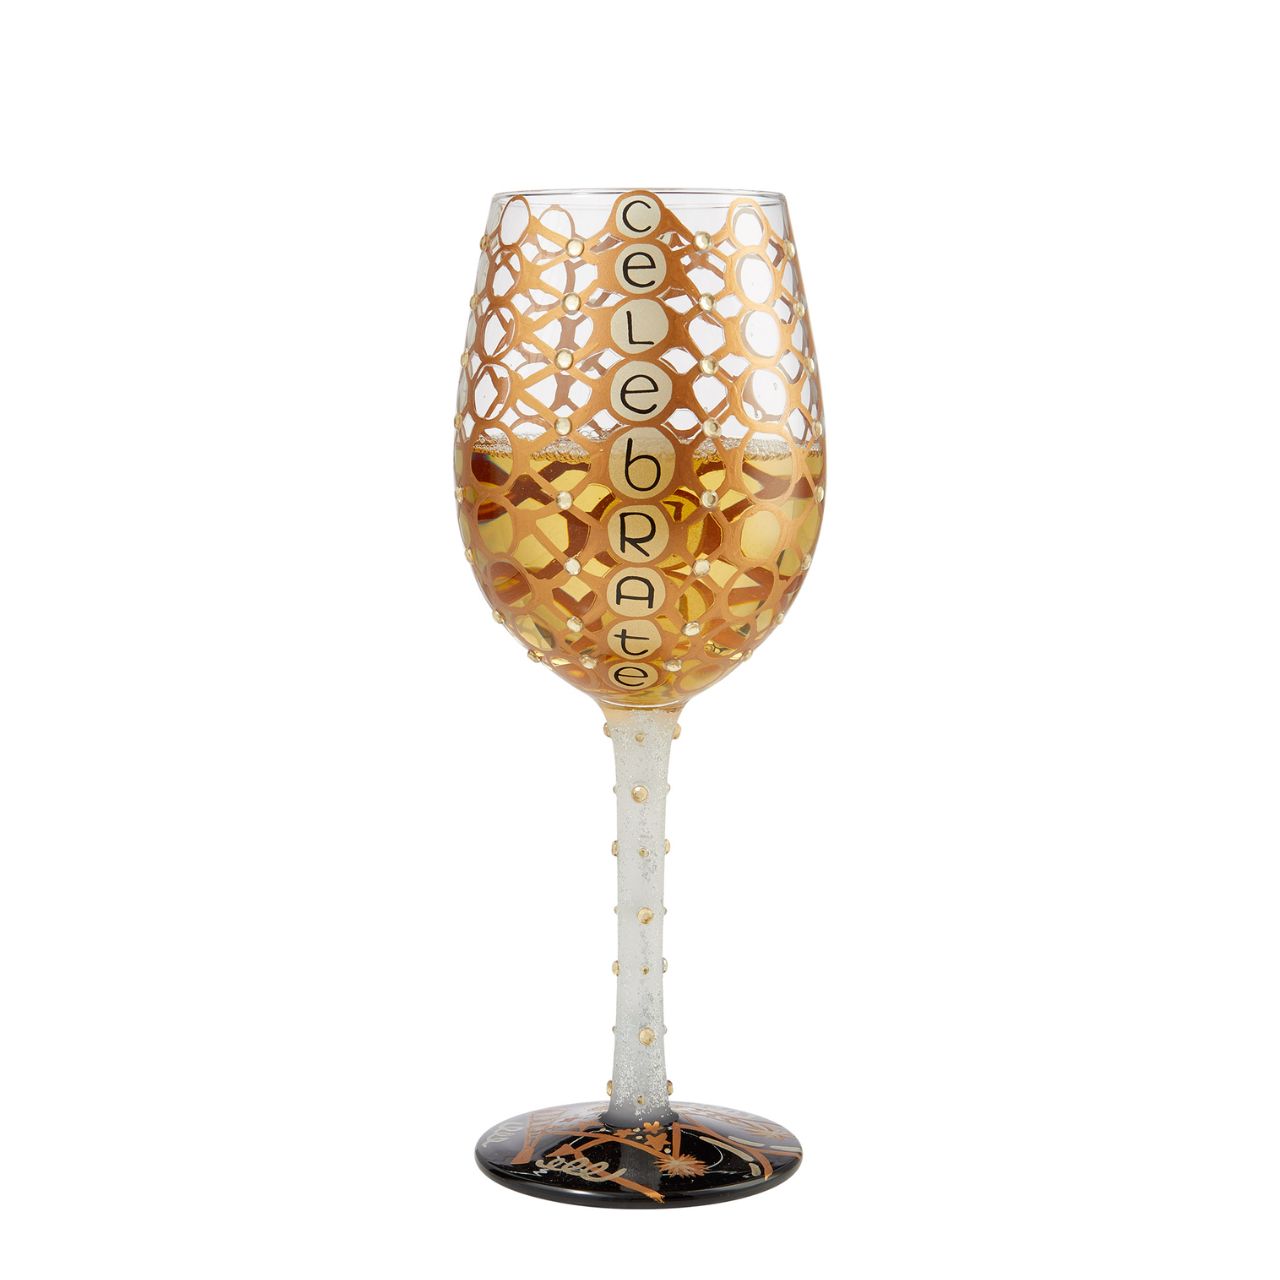 Celebrate Wine Glass by Lolita  Celebrate in style with this super glittery wine glass. Whatever the celebratory occasion, you'll be reaching for this glass, time and time again. Hand wash only. Securely packaged in a beautiful, decorative gift box.